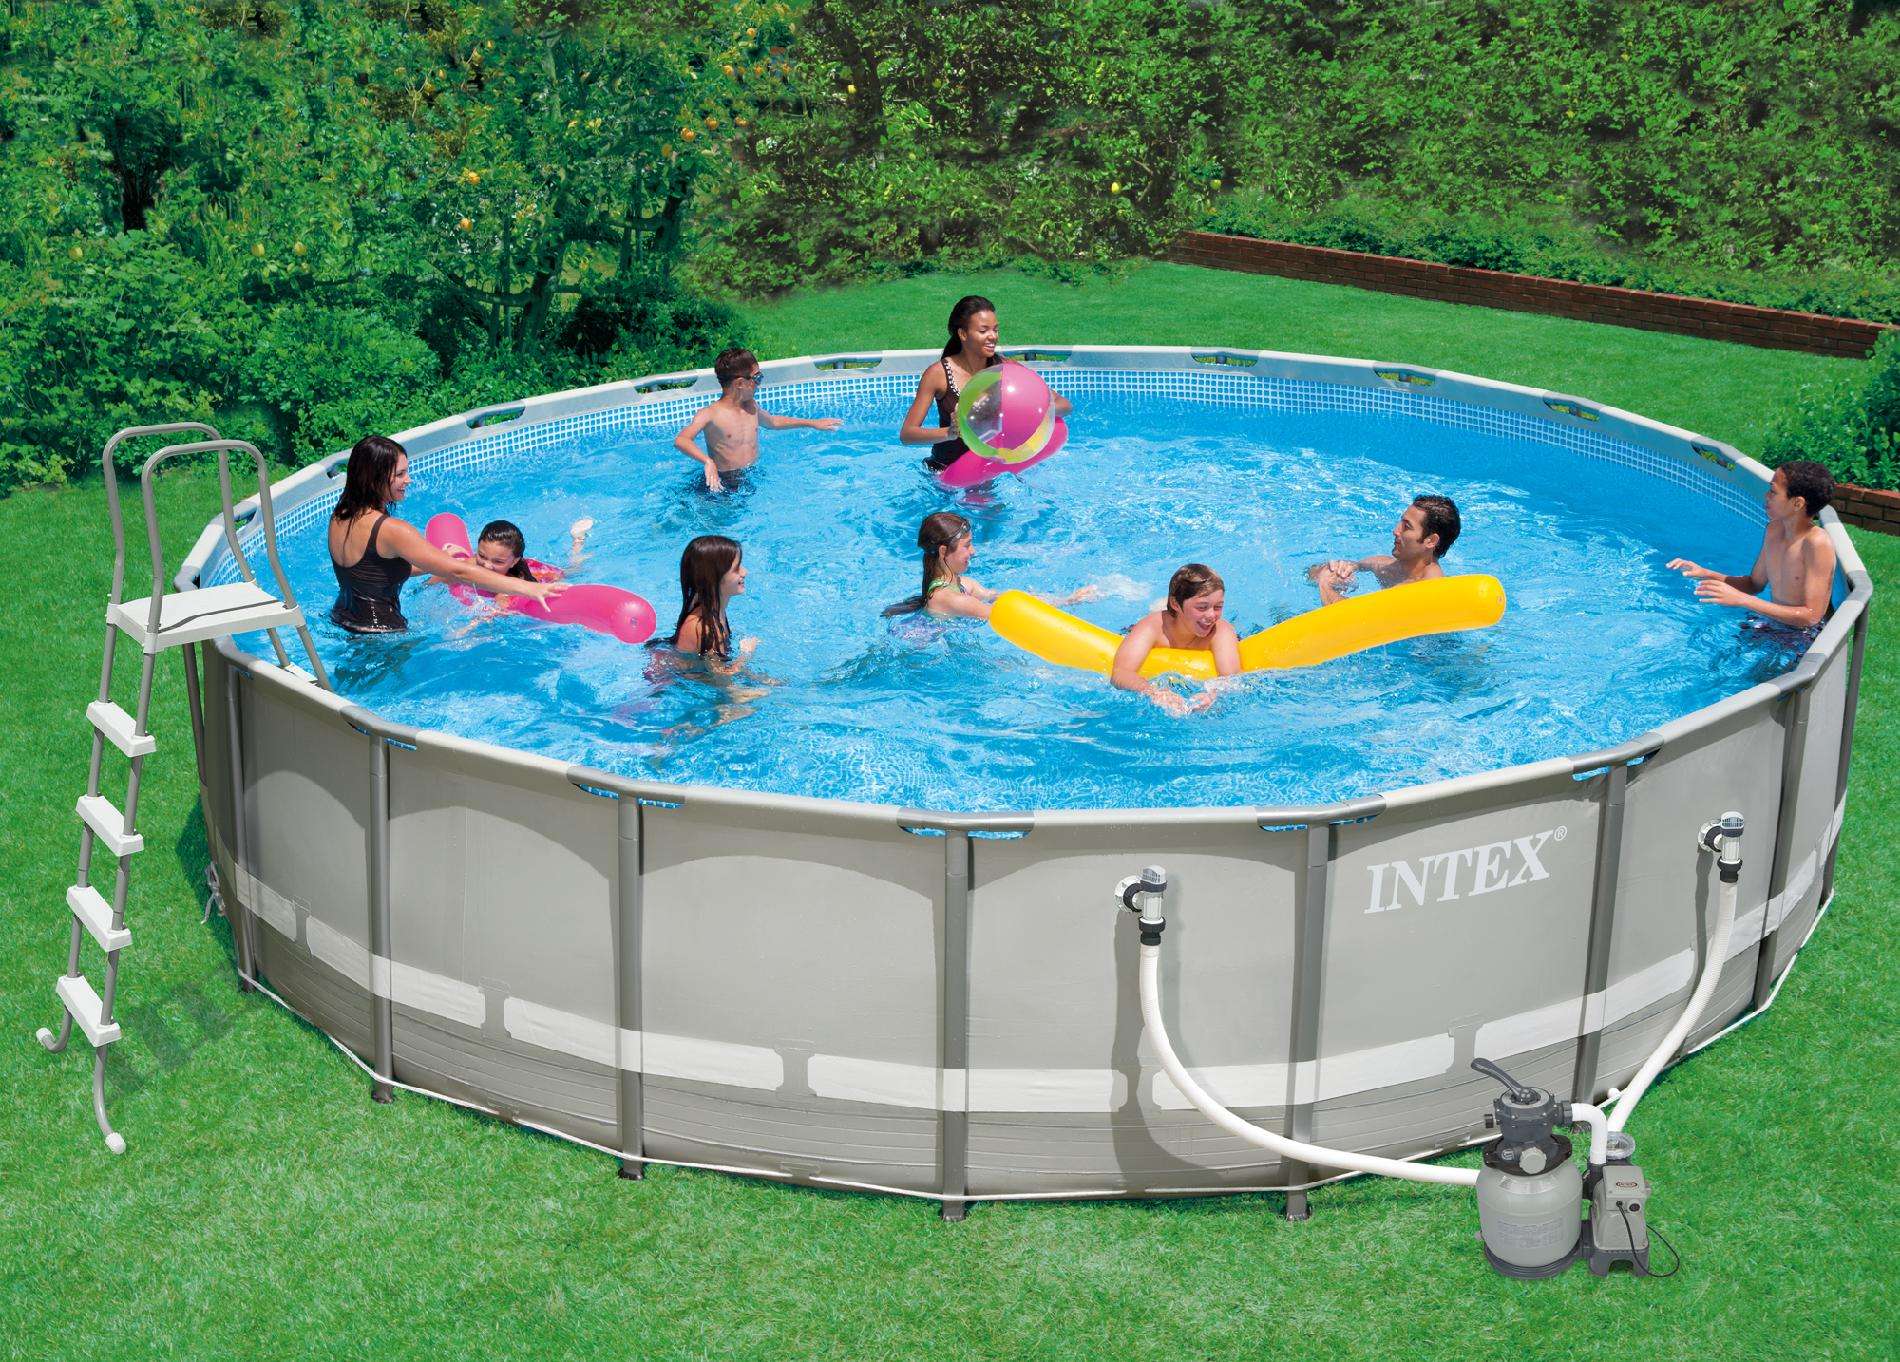 Coleman Pools vs Intex Pools: Which One Should You Buy?